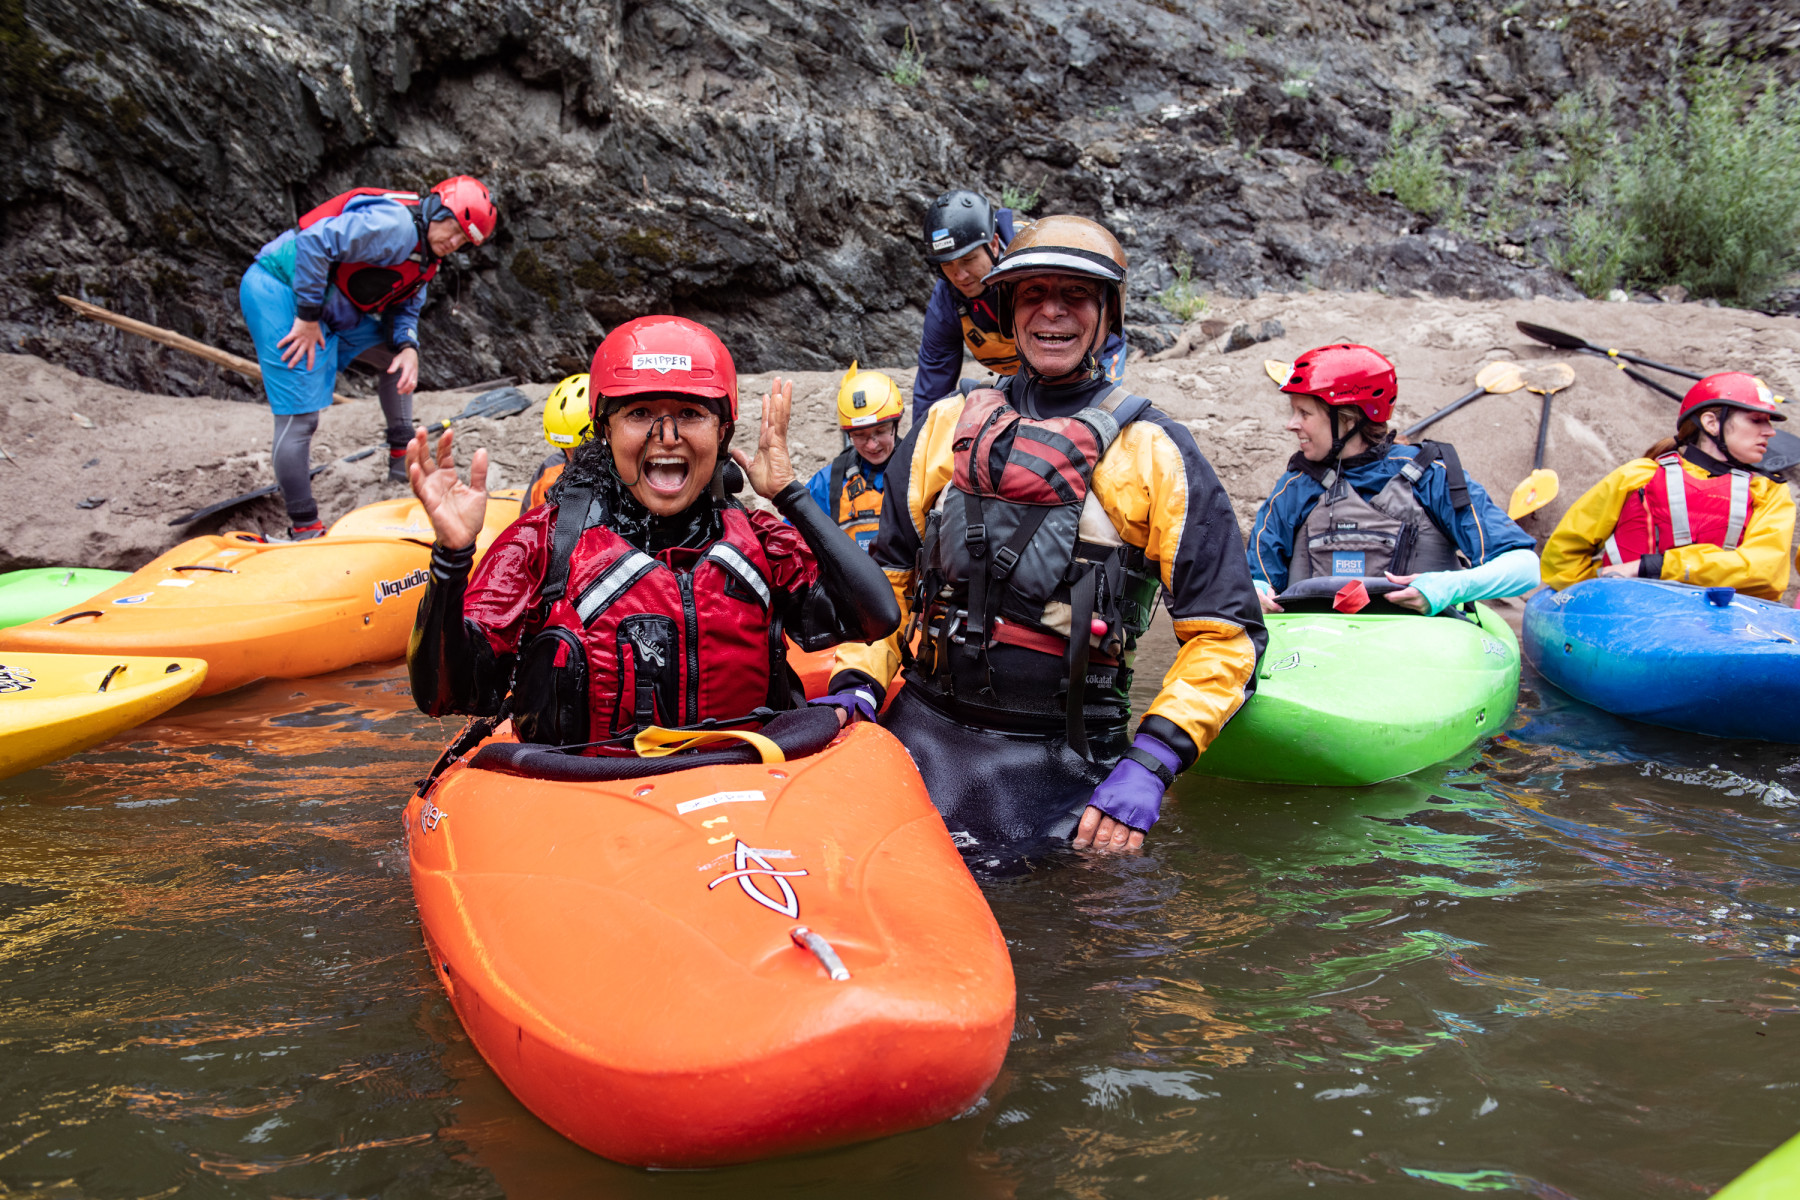 First Descents adventure | Multiple Sclerosis News Today | MS patients prepare to take a kayak trip with First Descents